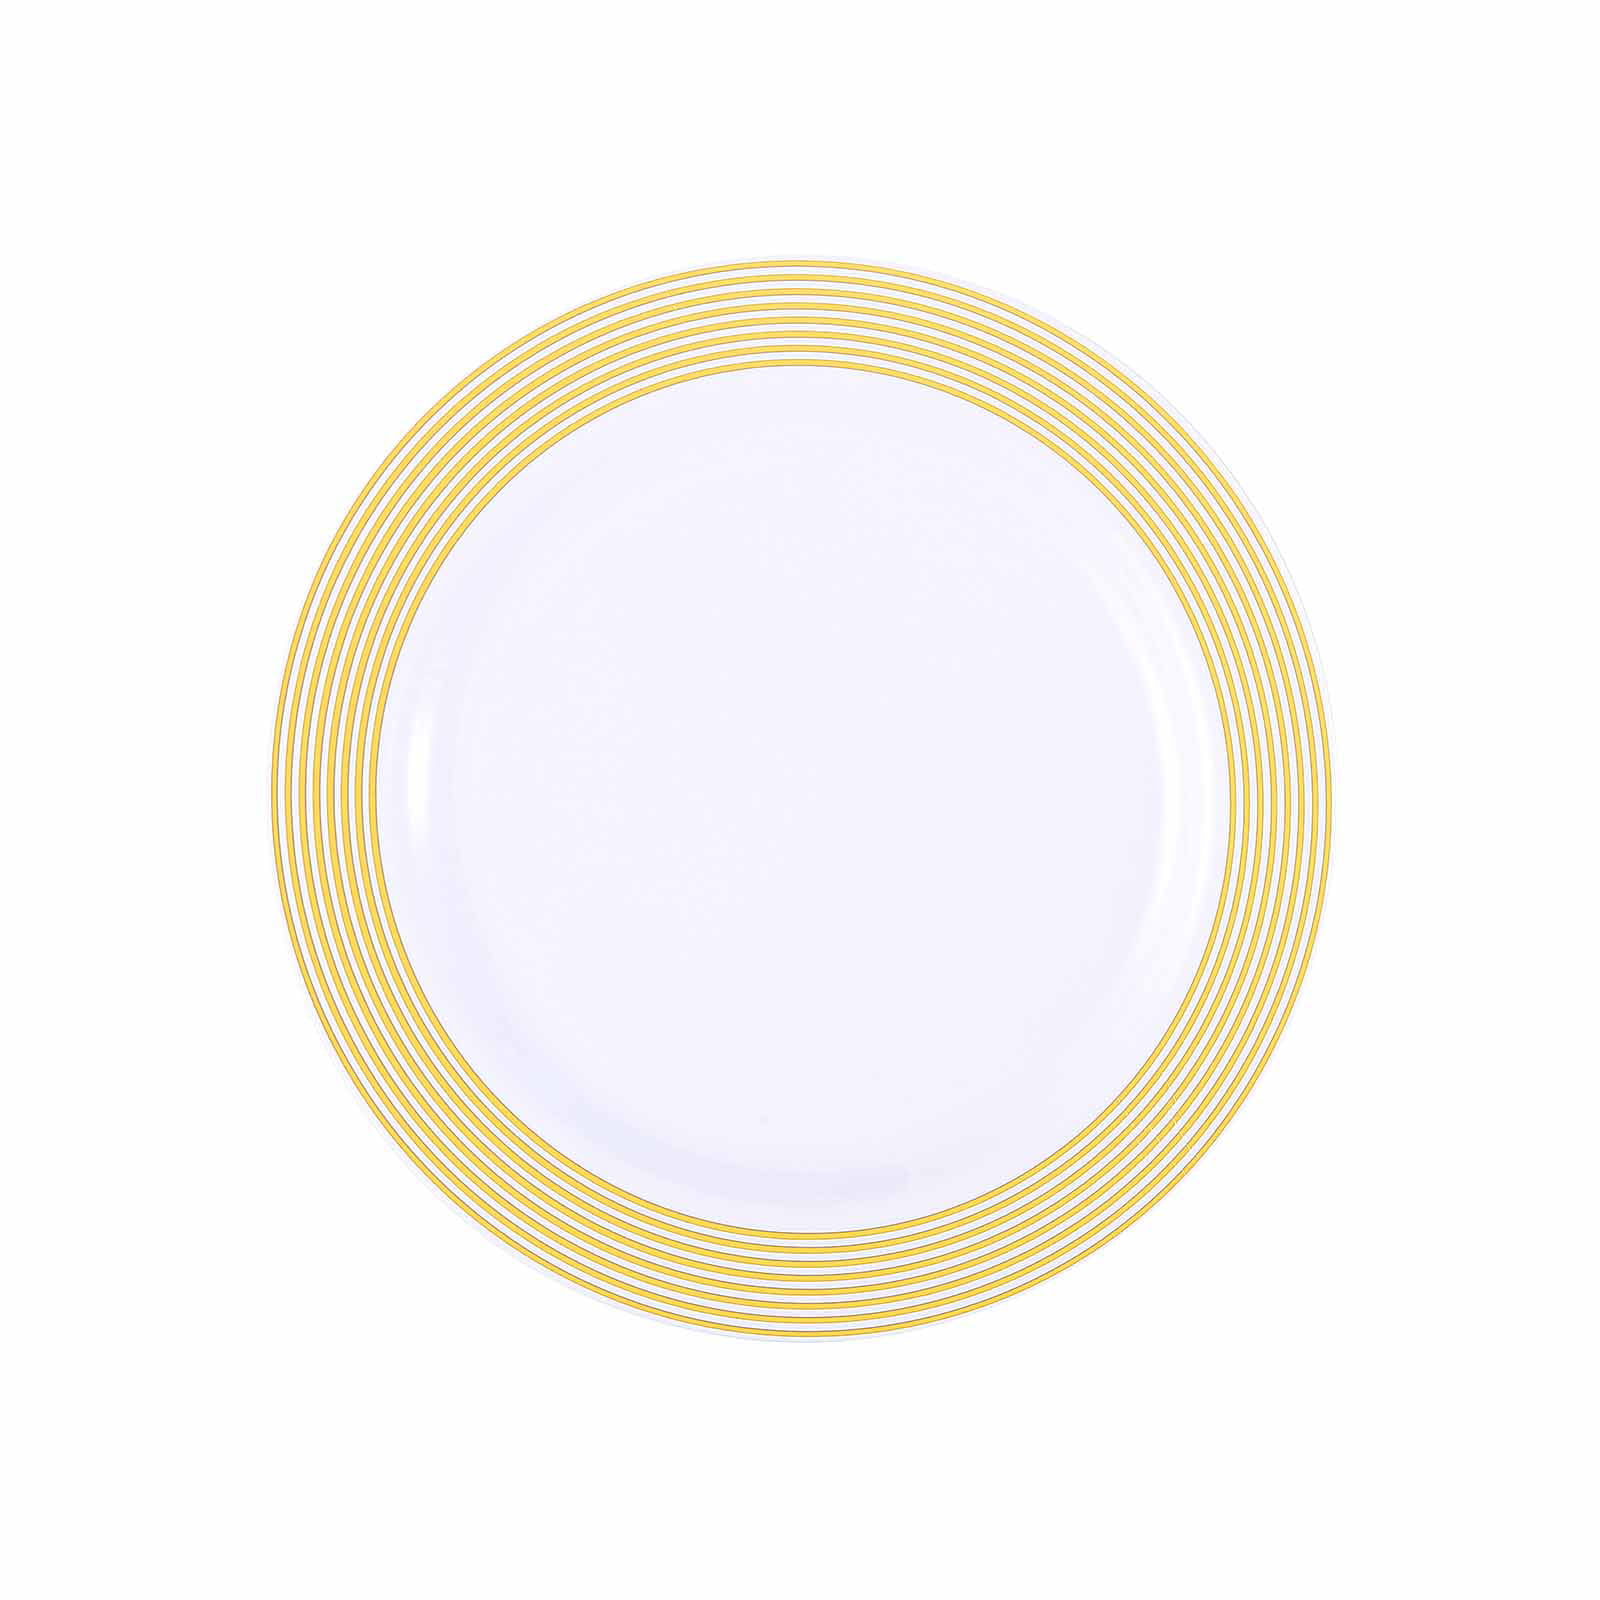 12 pcs White Round 10" Plates with Gold Polka Dots Trim Catering Disposable Sale 